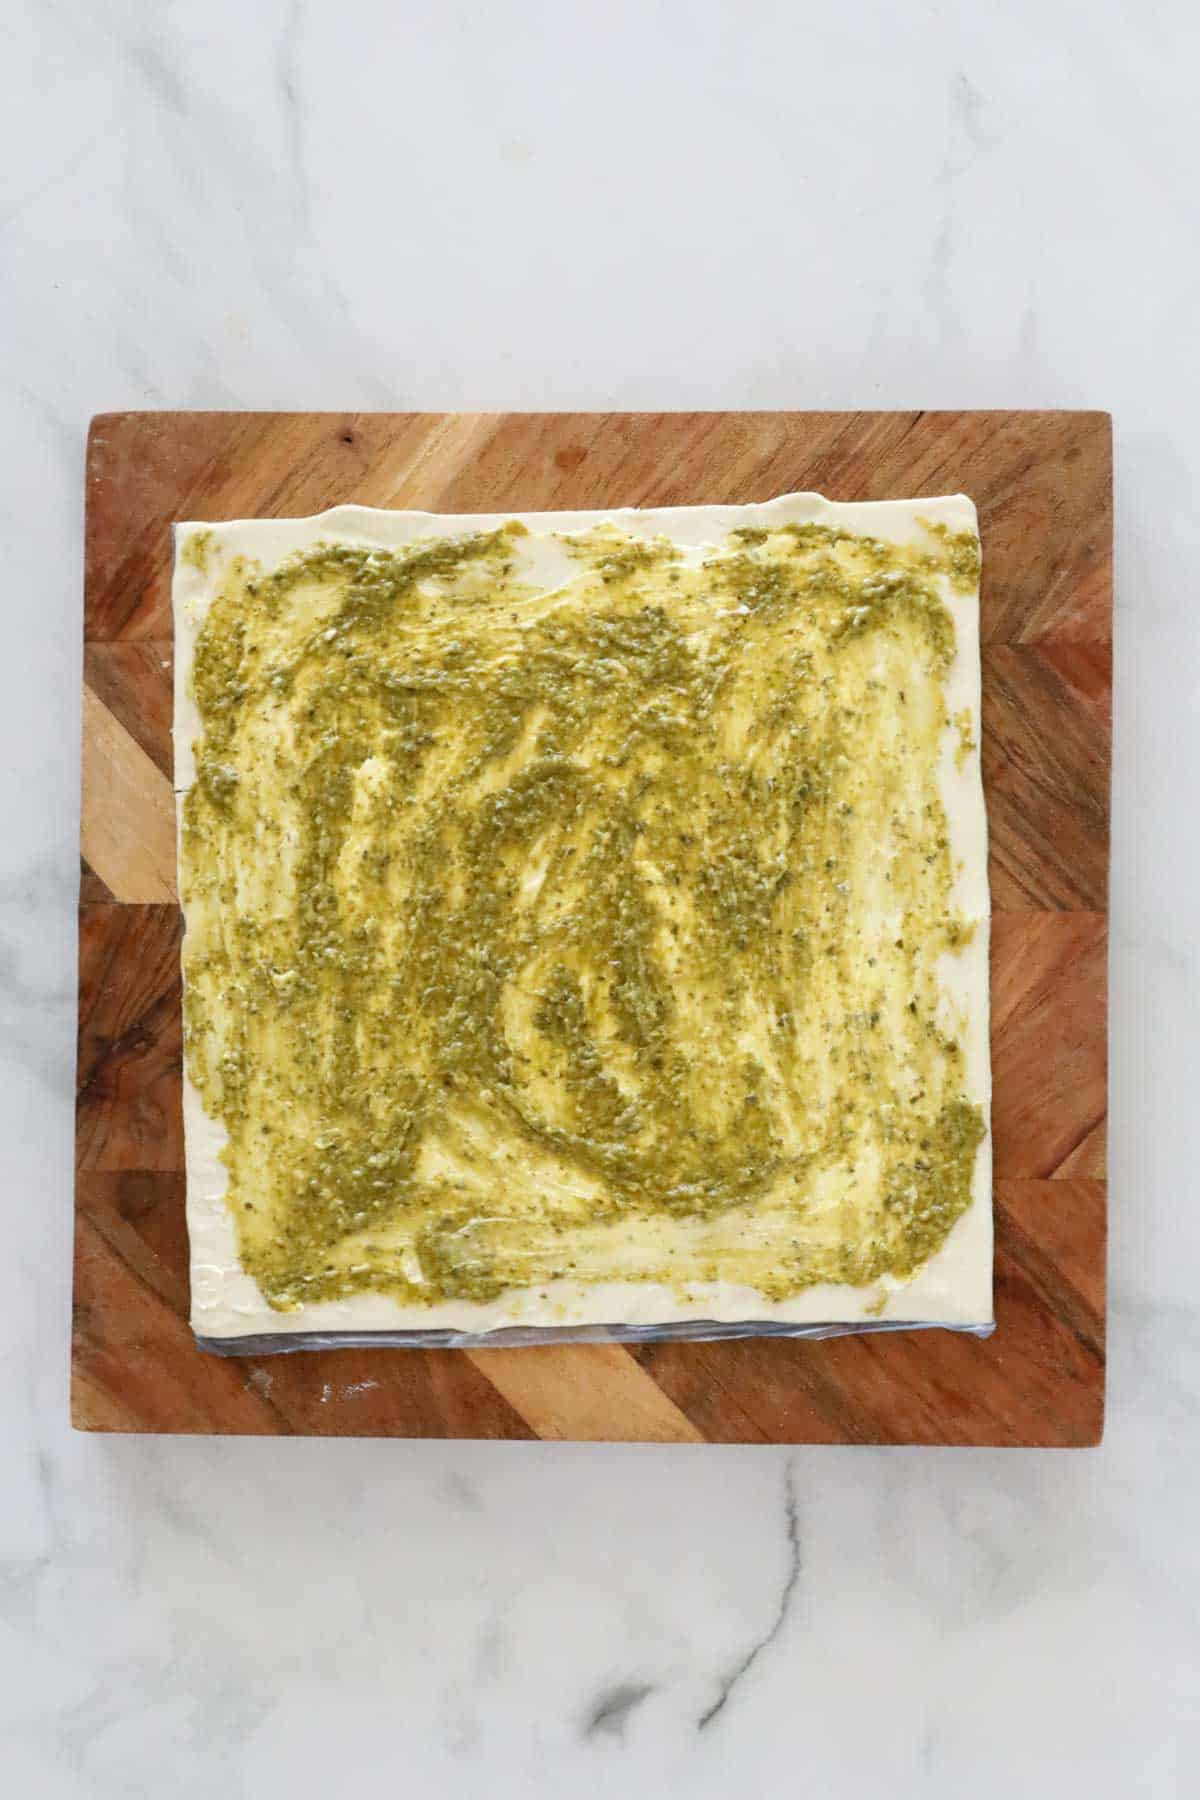 Pesto and cream cheese spread on a puff pastry.